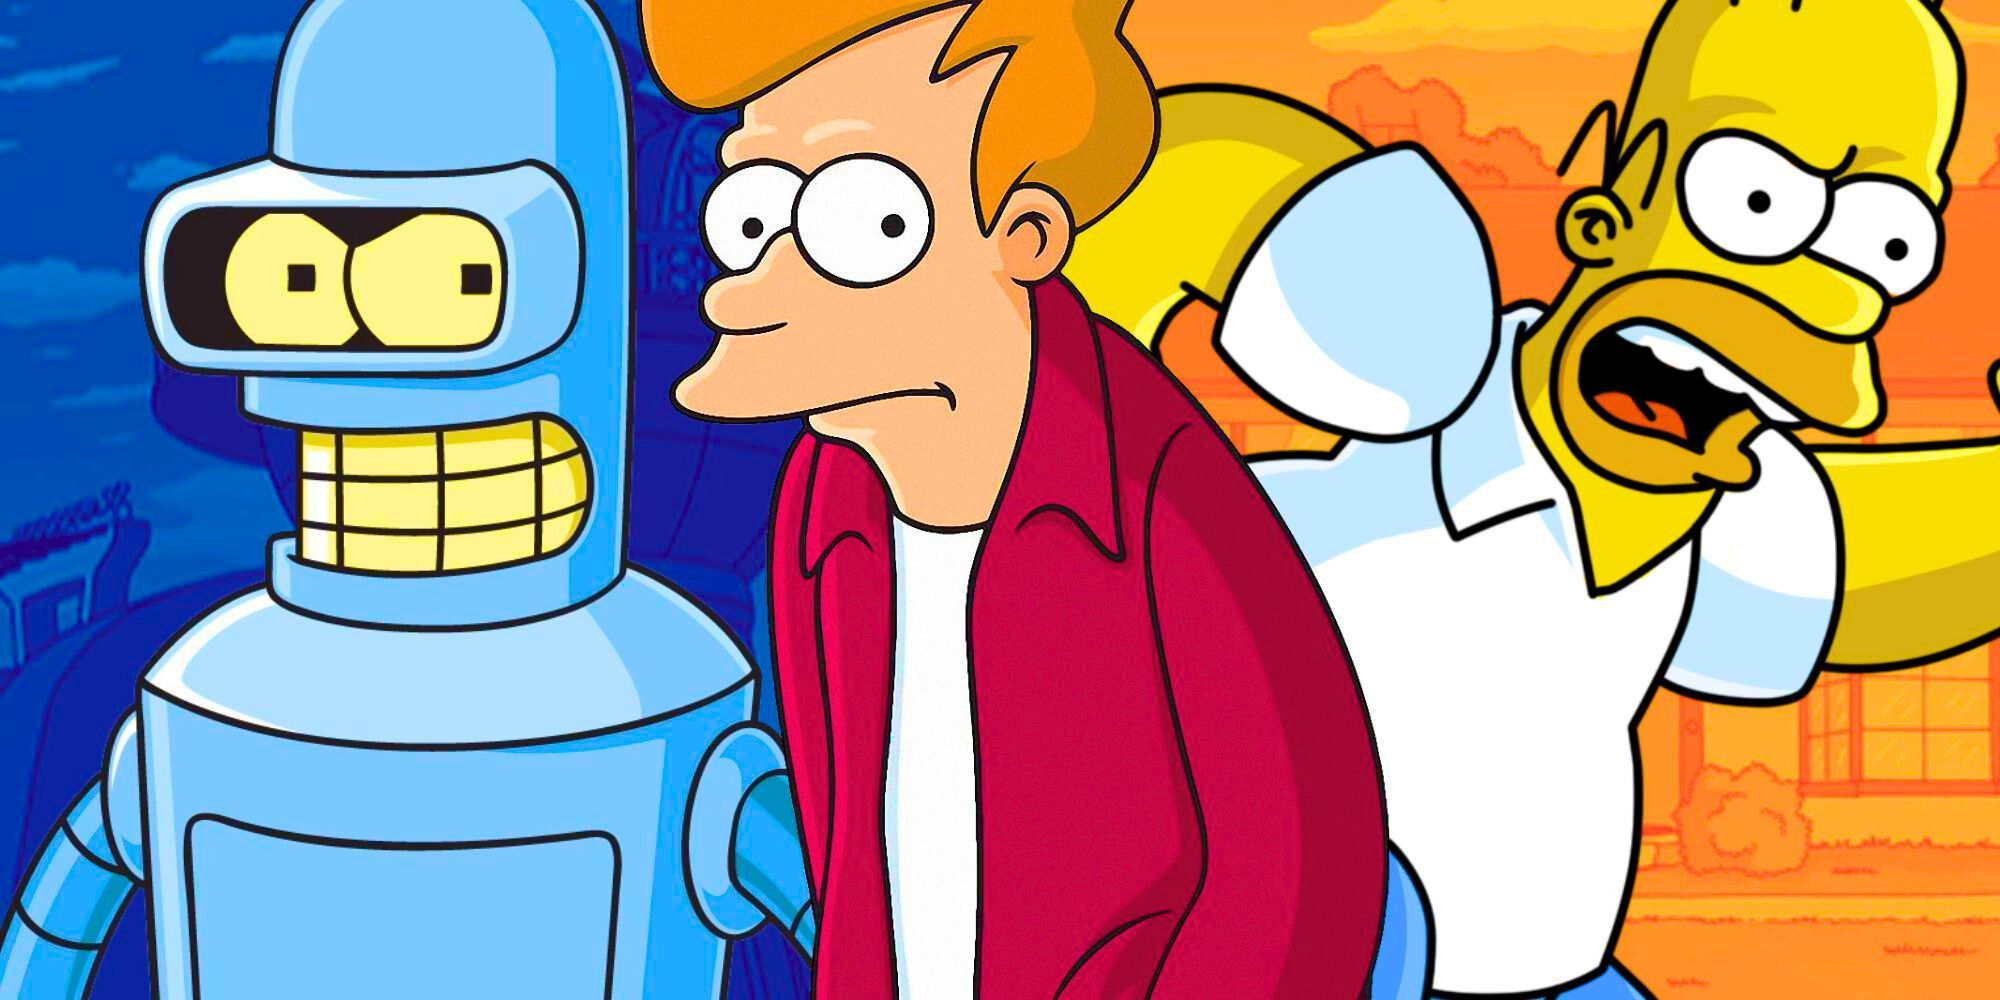 A custom image of Bender and Fry from Futurama and Homer from The Simpsons